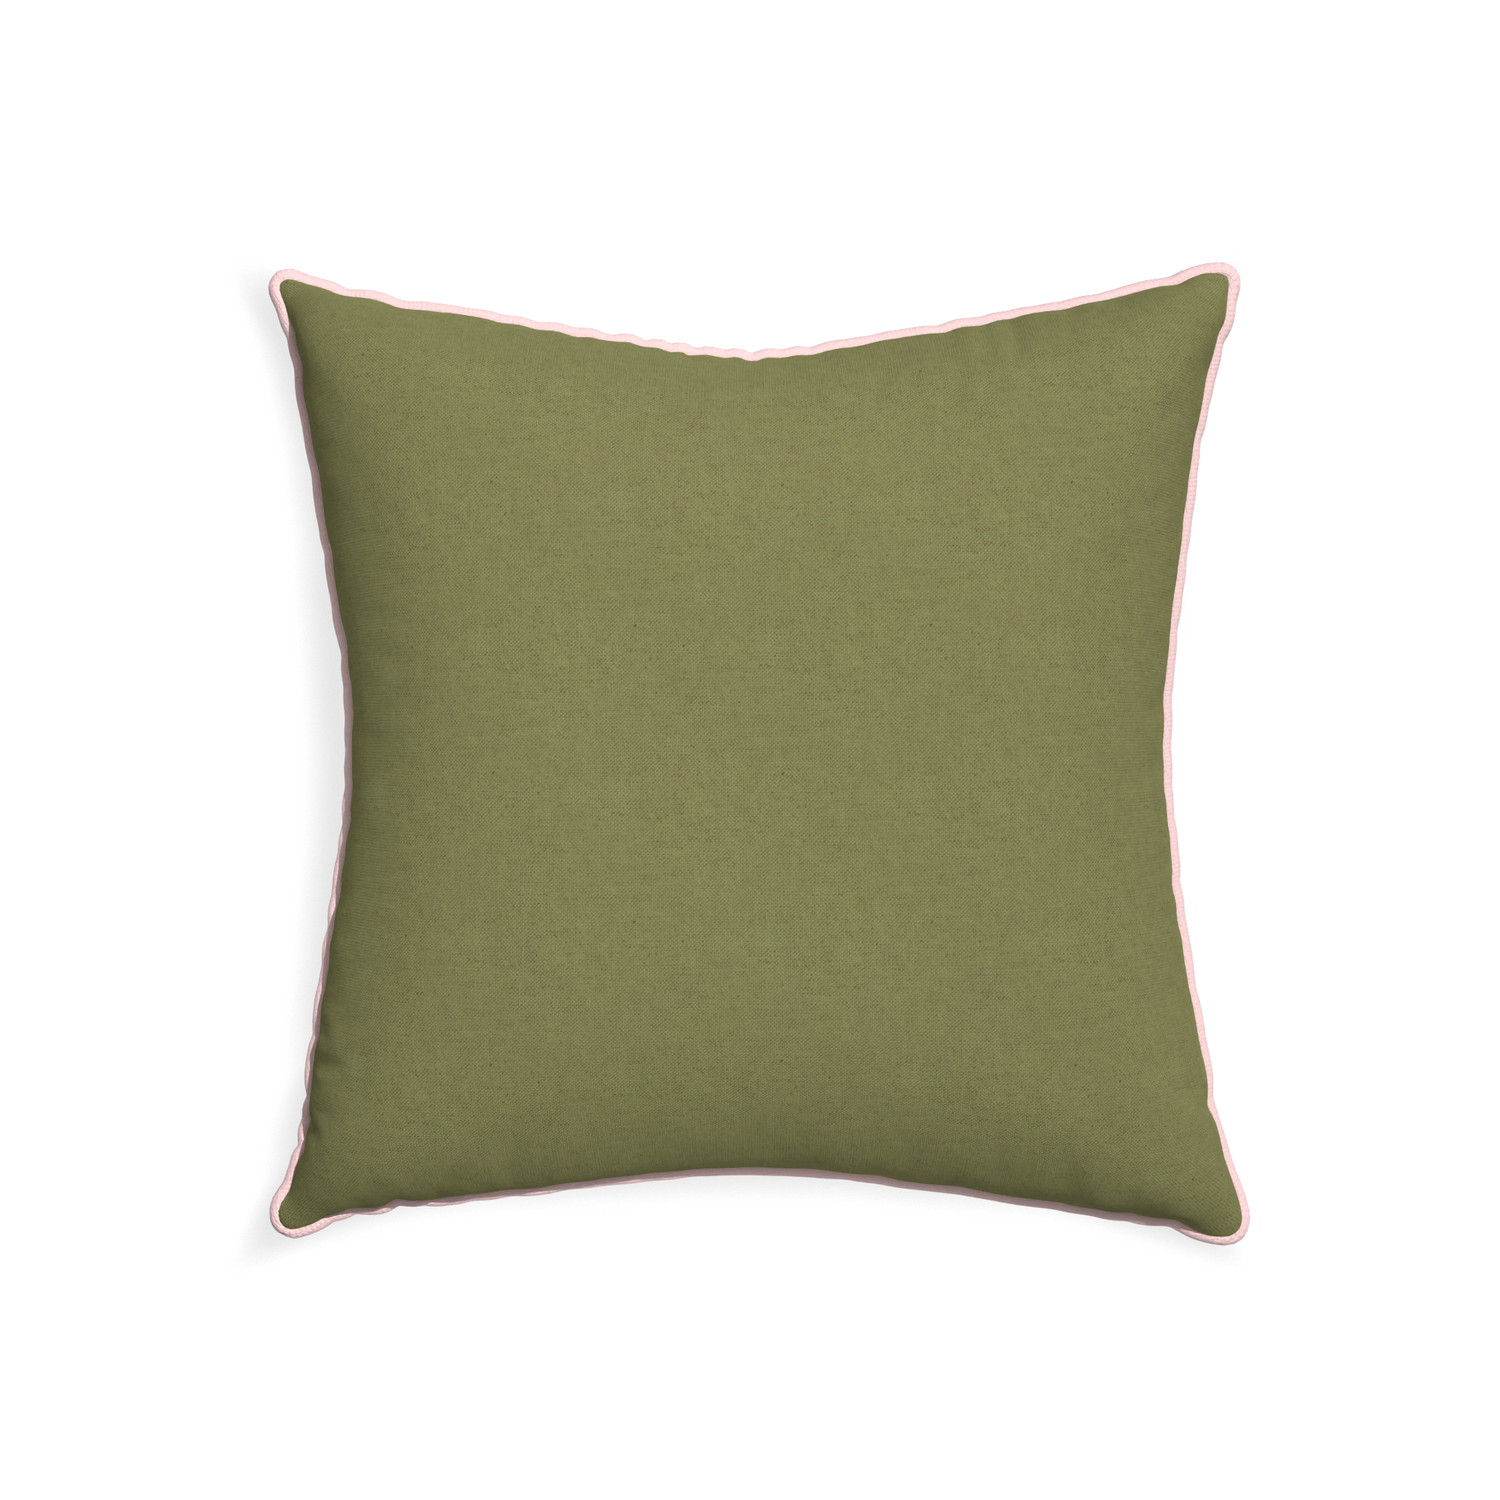 22-square moss custom moss greenpillow with petal piping on white background